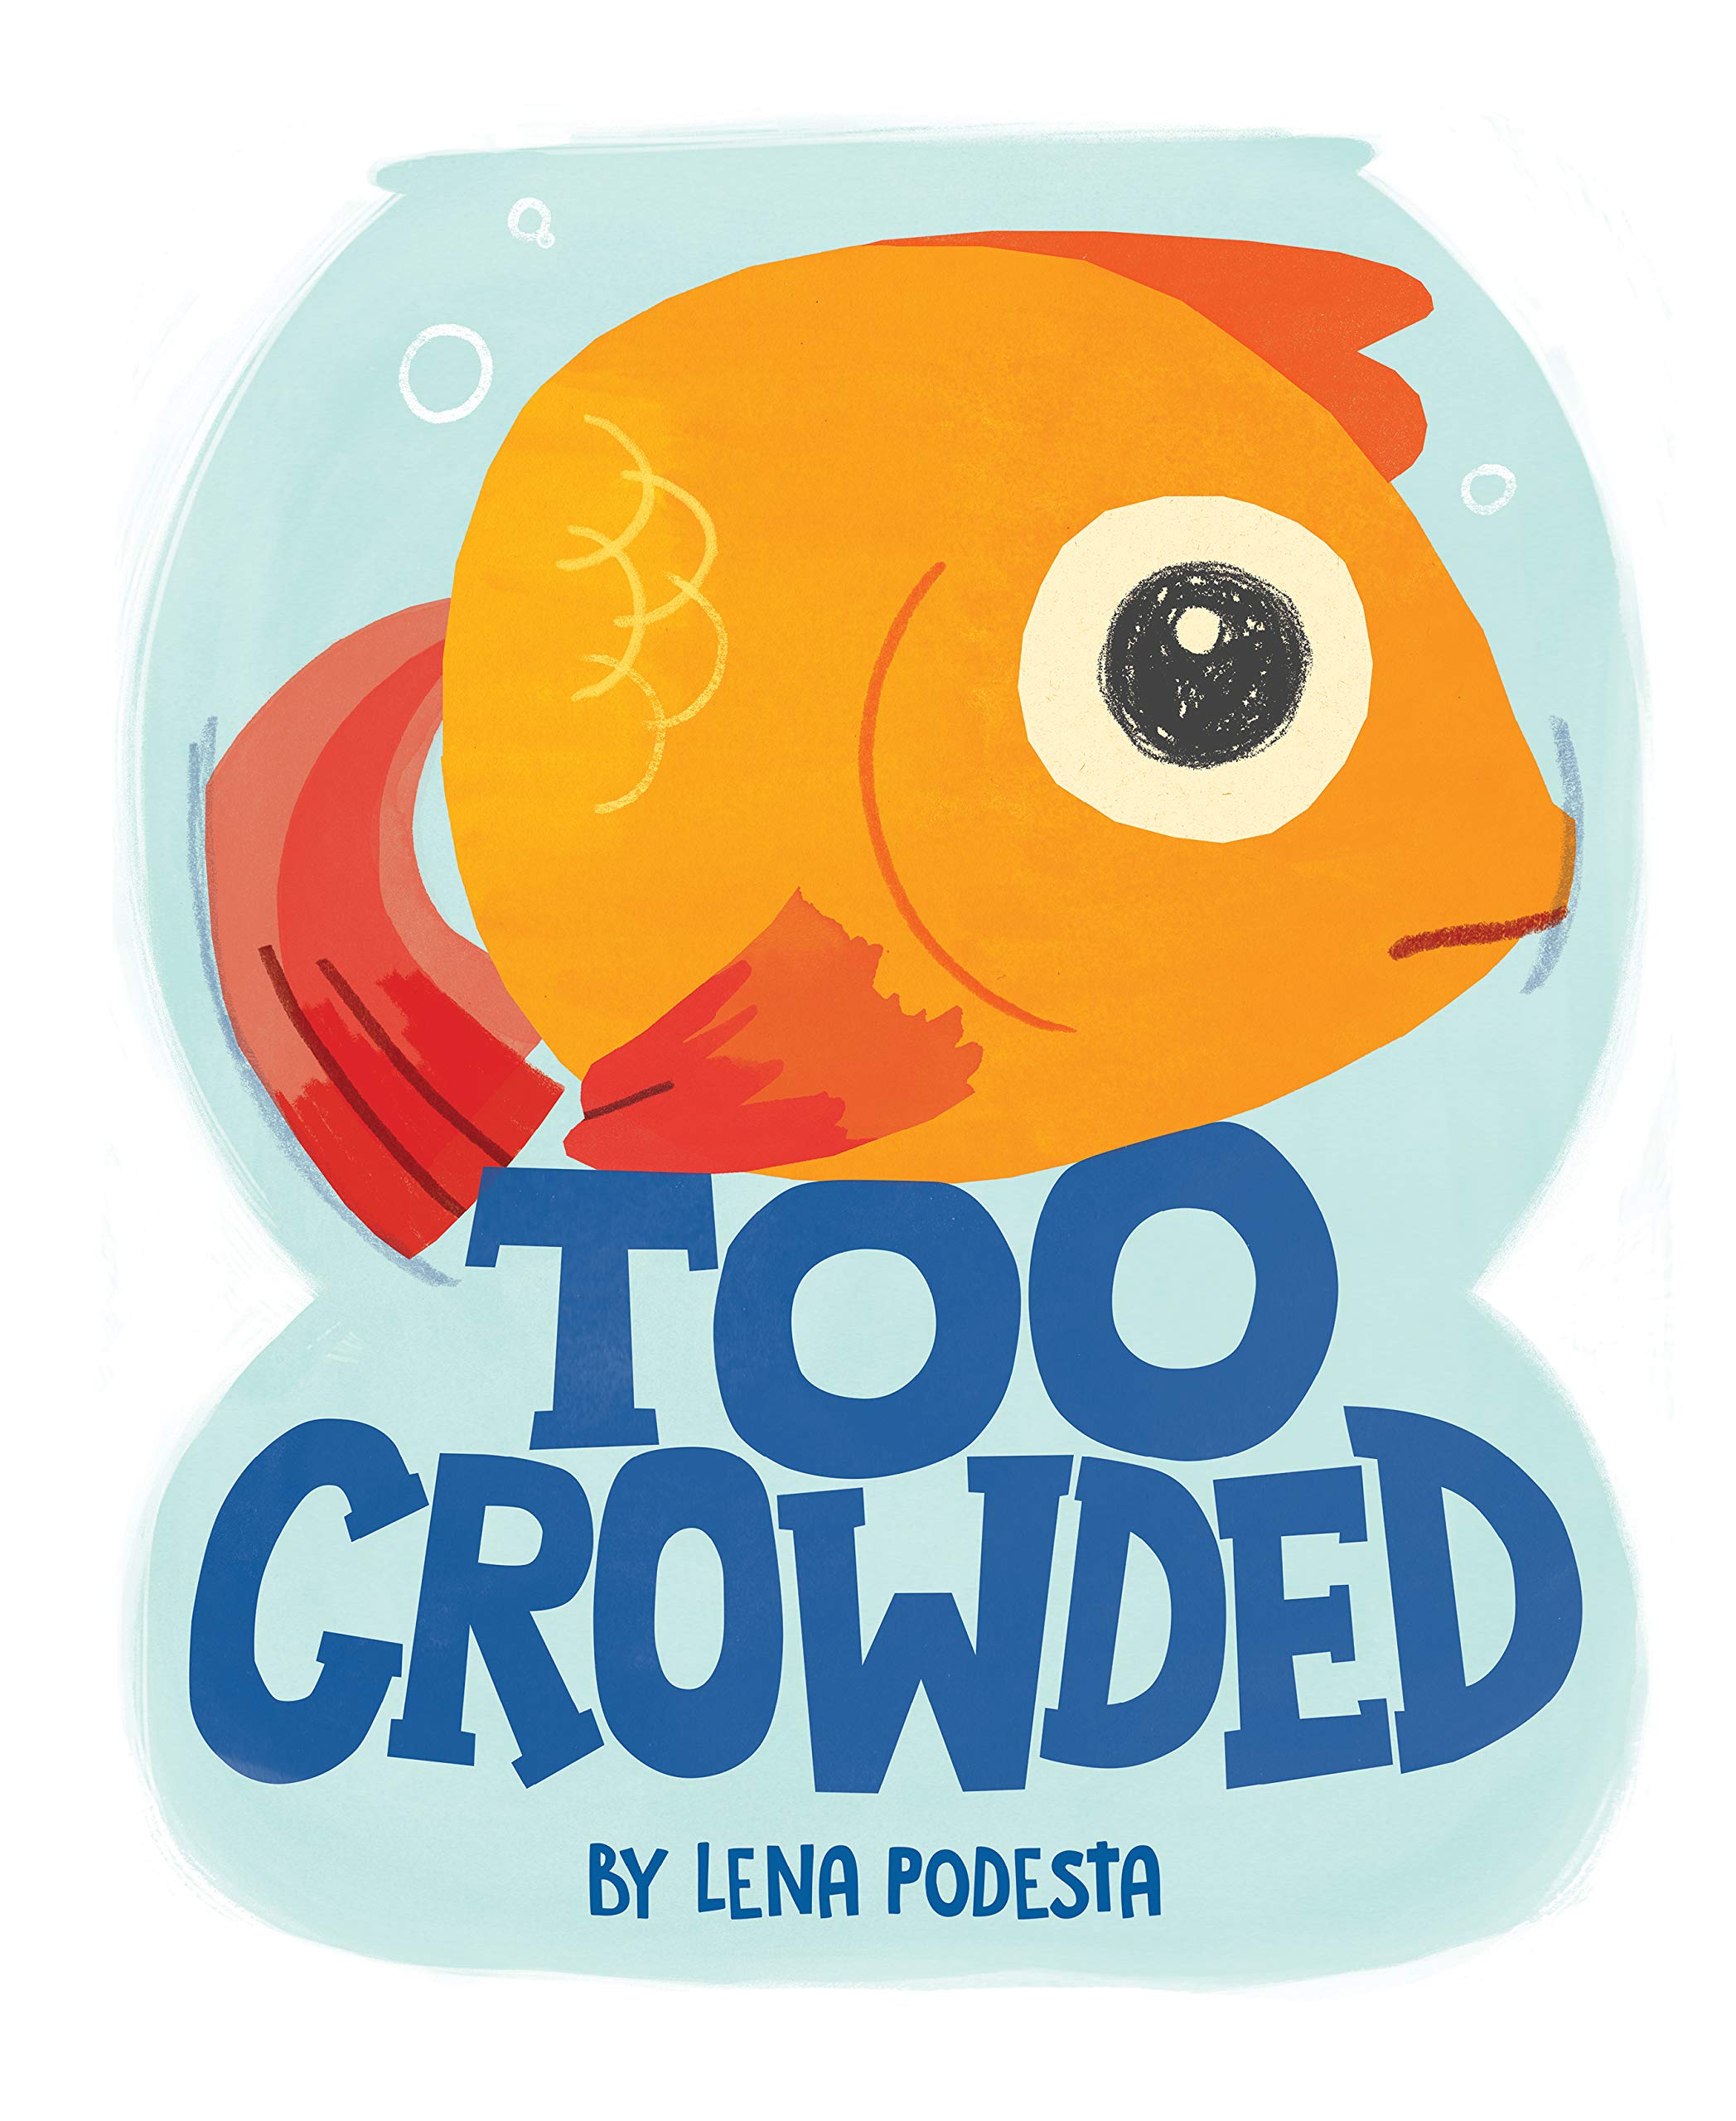 image for "too crowded"